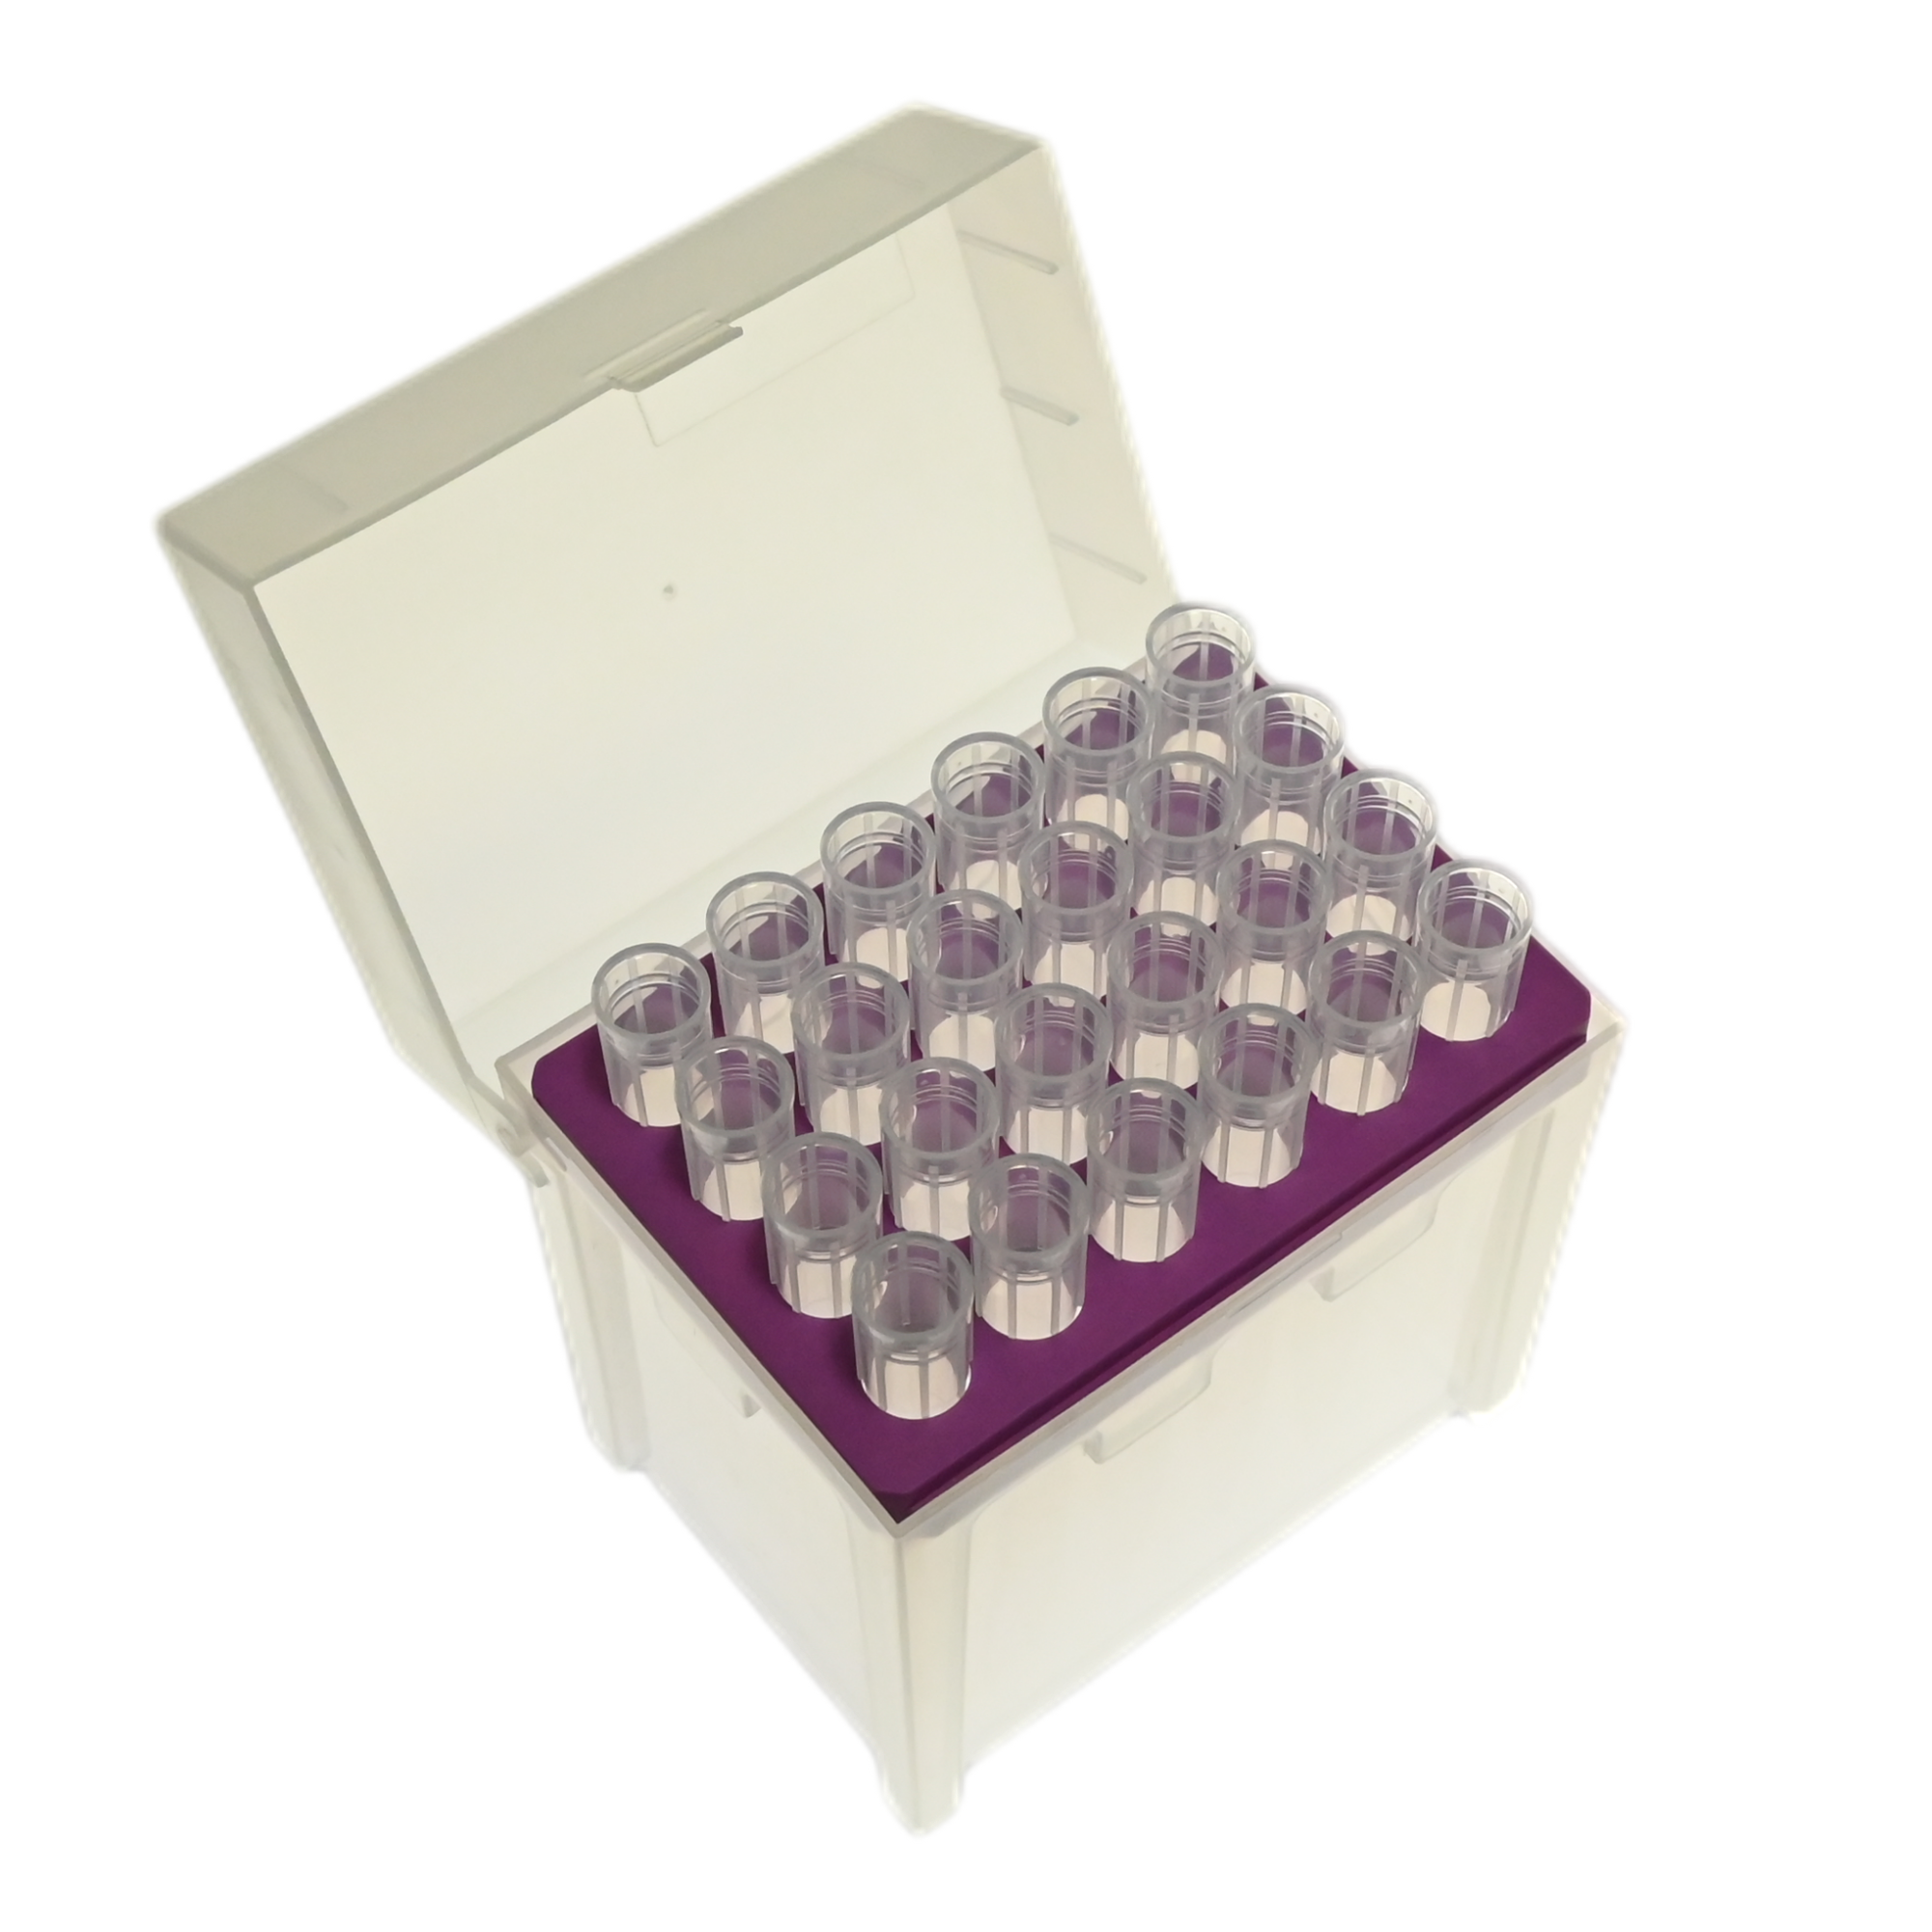 5mL Universal Pipette tips Featured Image